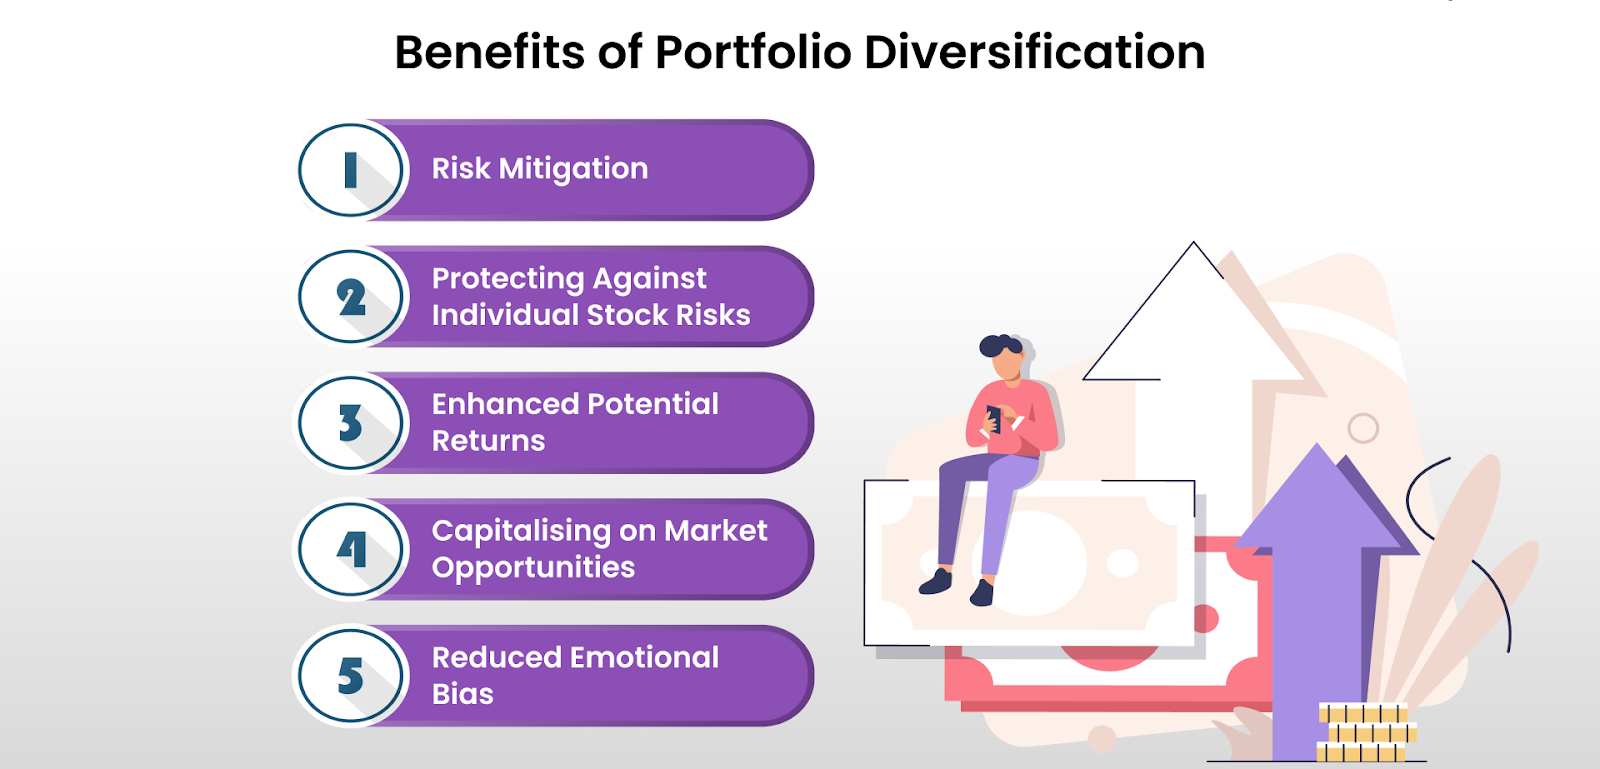 Portfolio Management: Definition & Everything You Need To Know